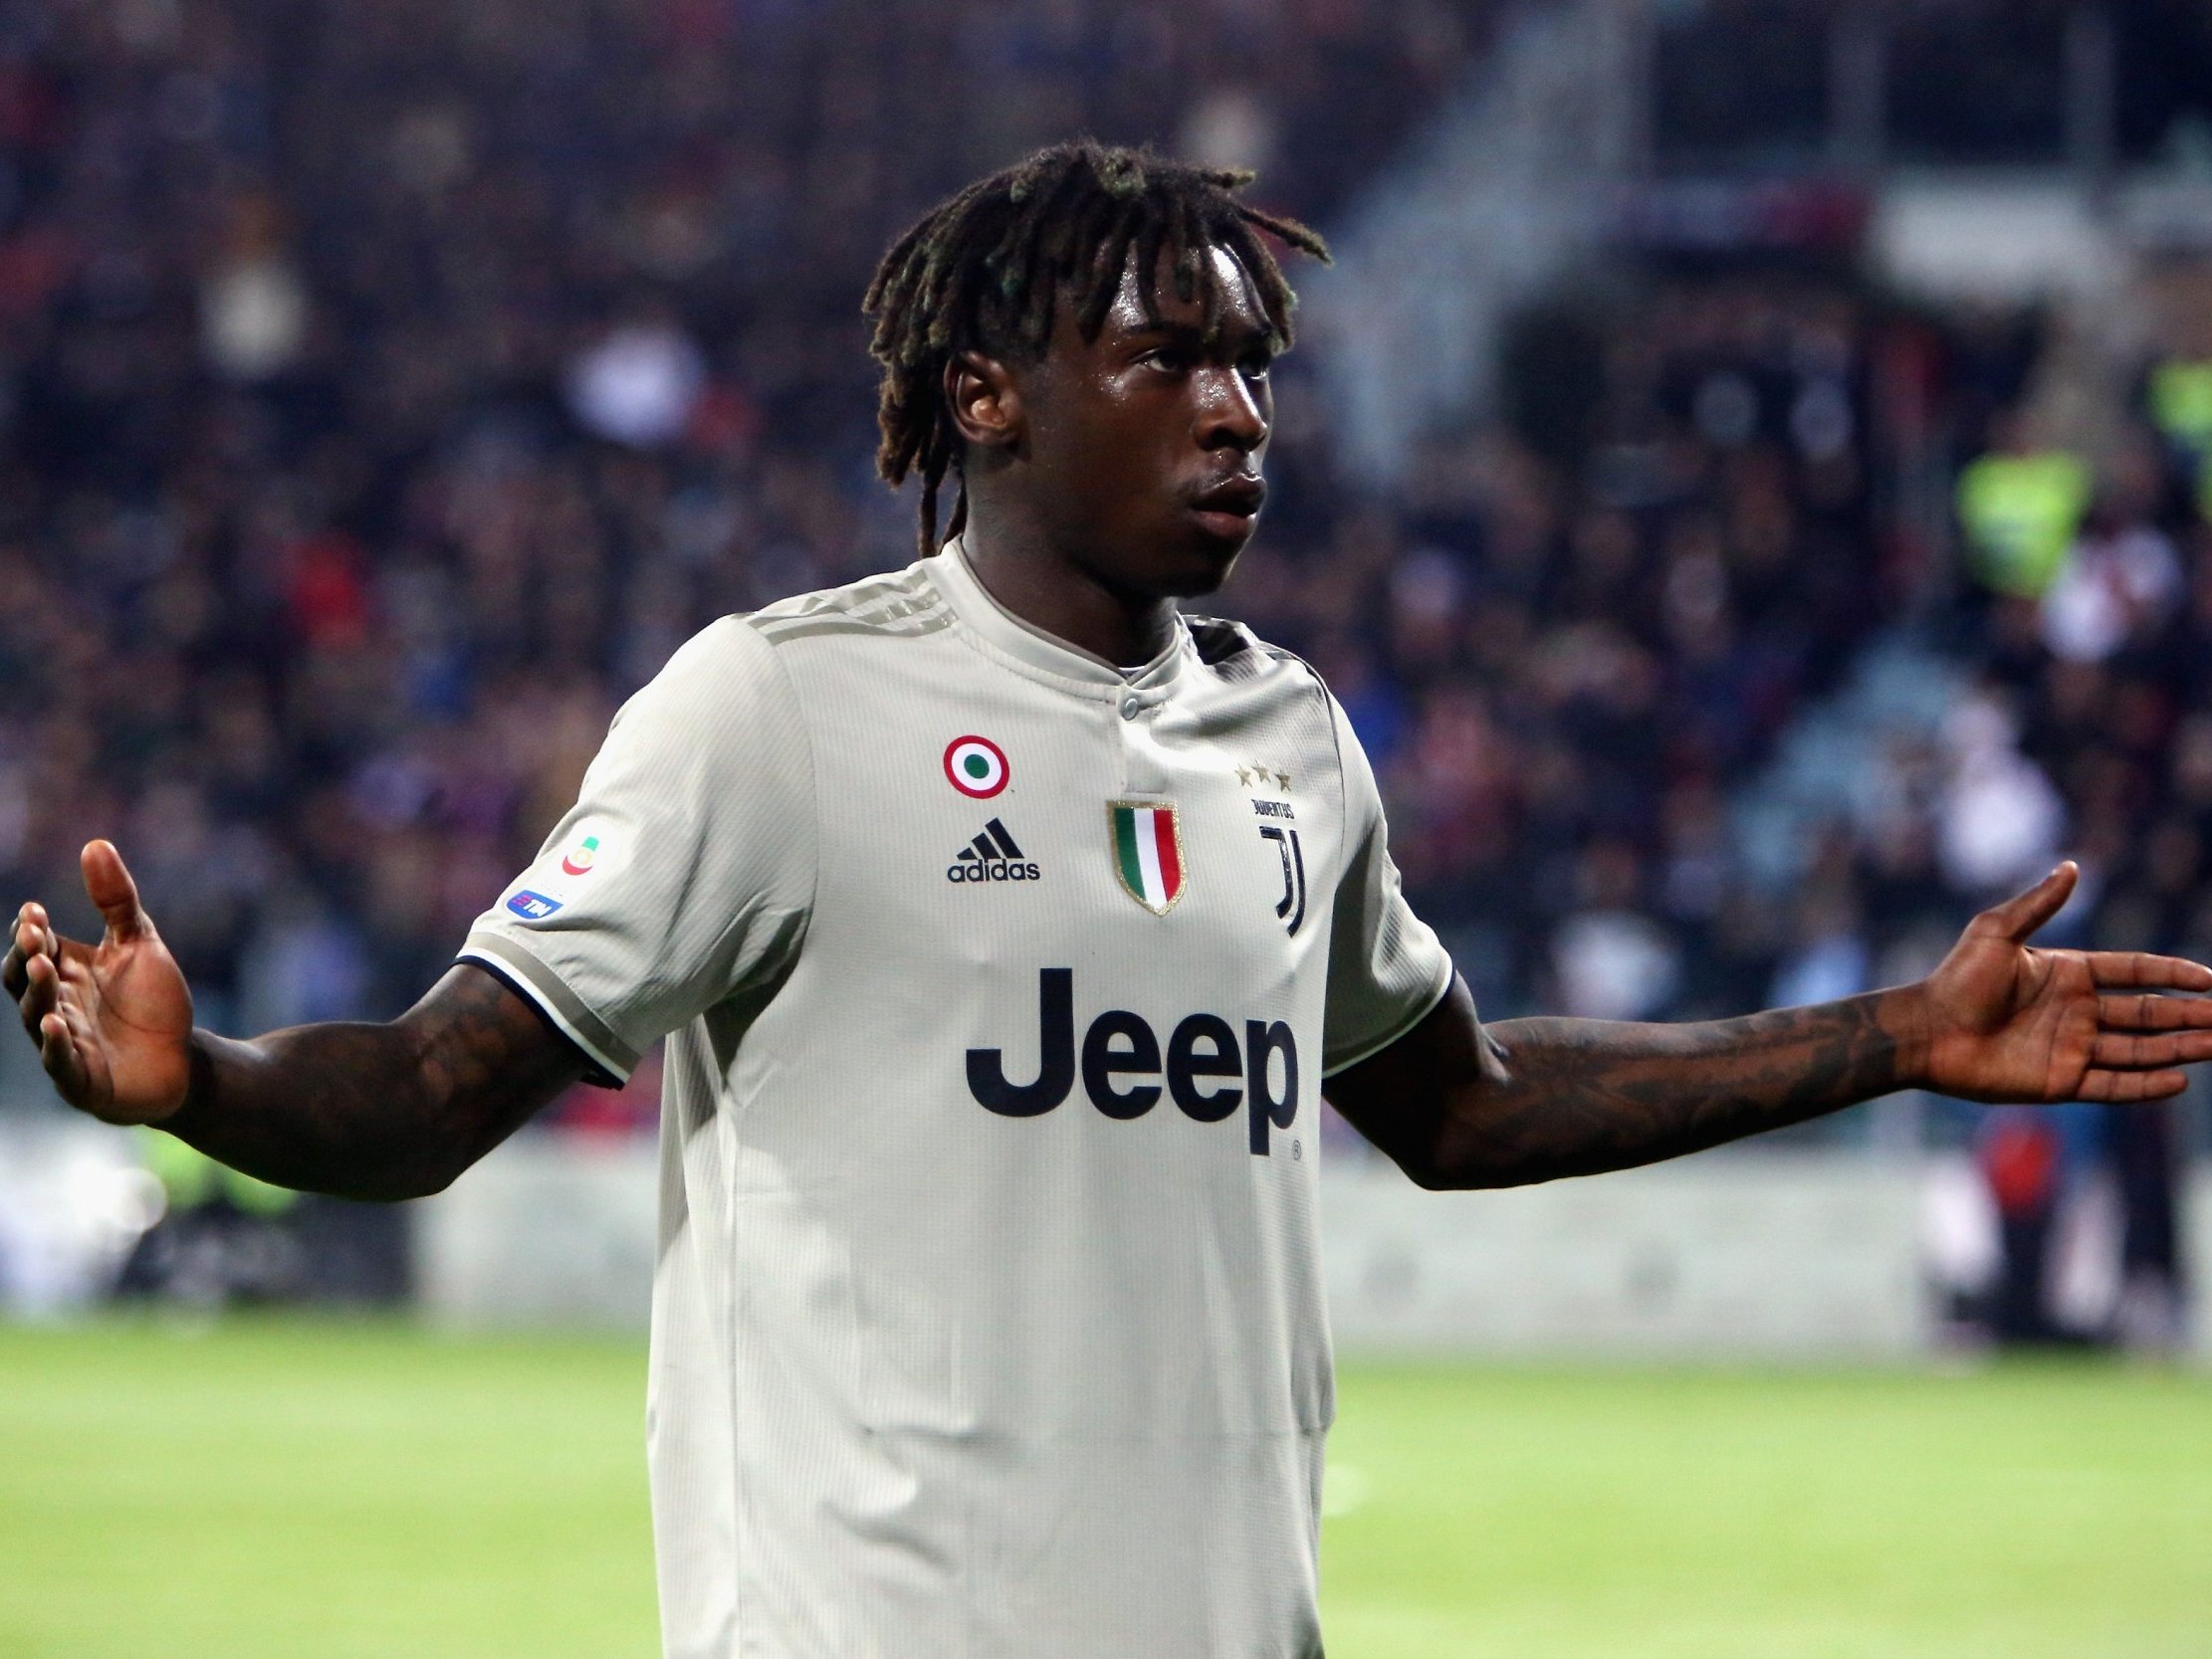  Video – On this day, Kean silenced the haters at Cagliari